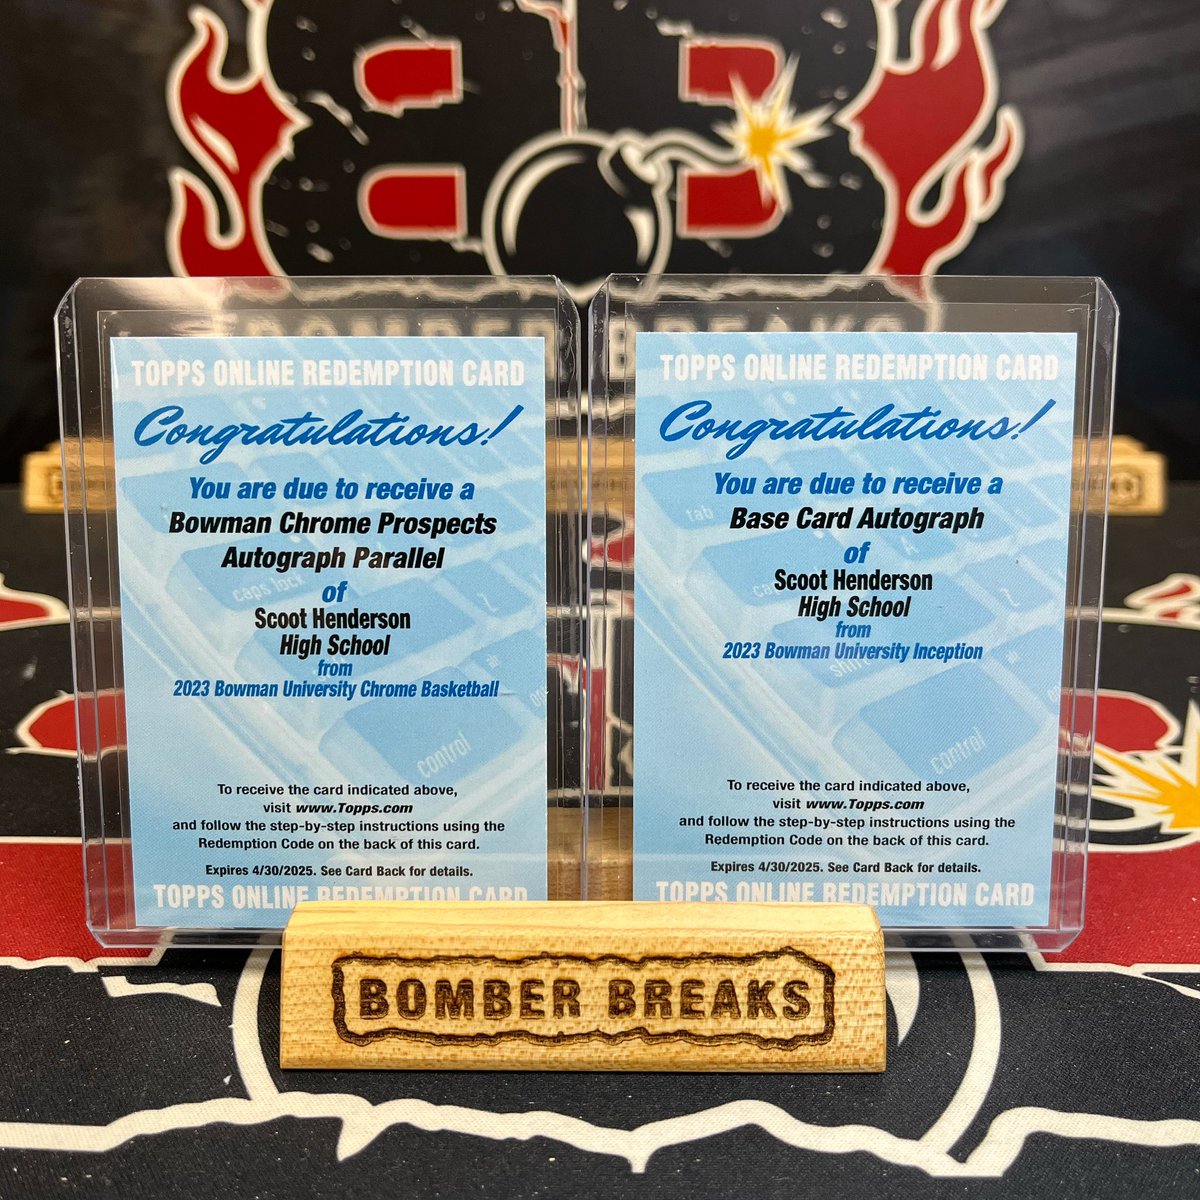 Back to Back Scoot Henderson Autos pulled tonight in our Bowman Inception & Bowman Chrome University breaks! 🔥🔥
#basketballcards #scoothenderson #nba #groupbreaks #boxbreaks #casebreaks #thehobby #nba #autograph #boom #follow #share #bowman #chrome